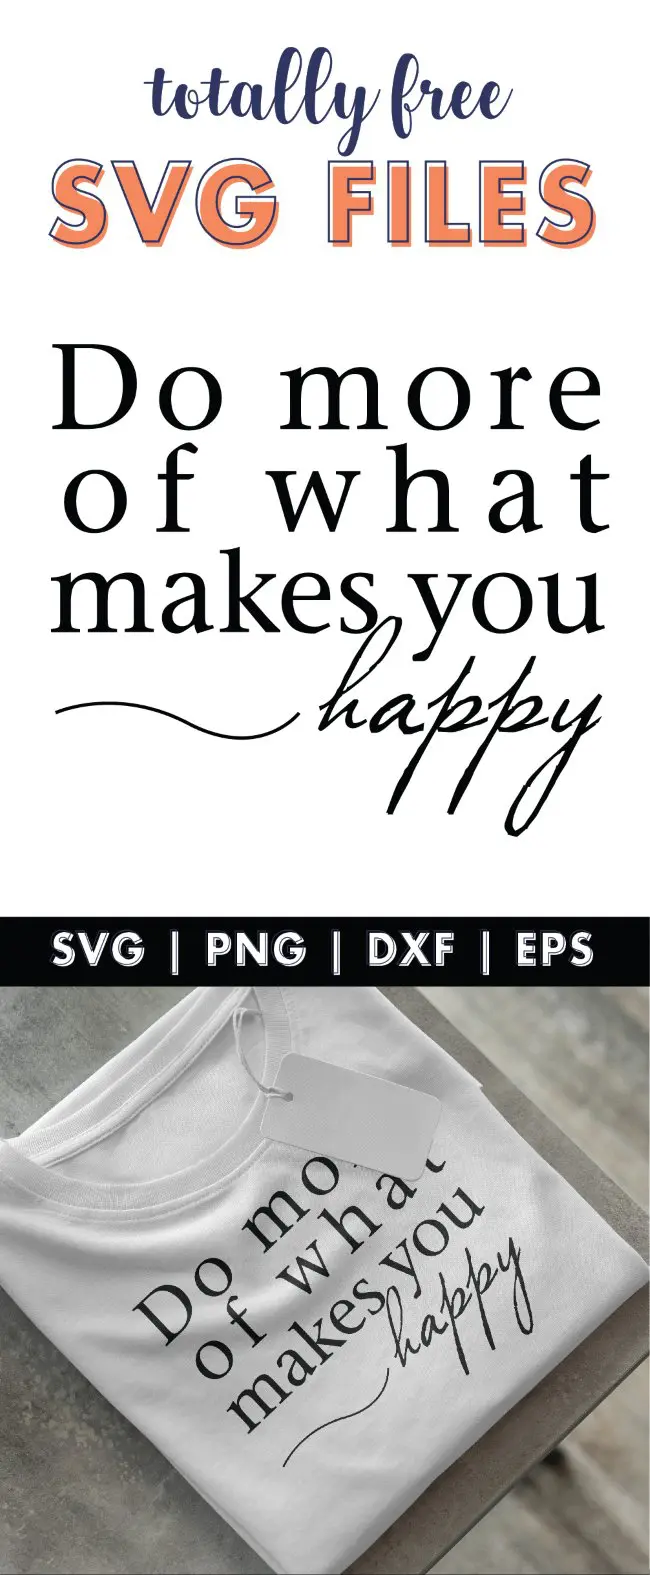 Do more of what makes you happy svg file